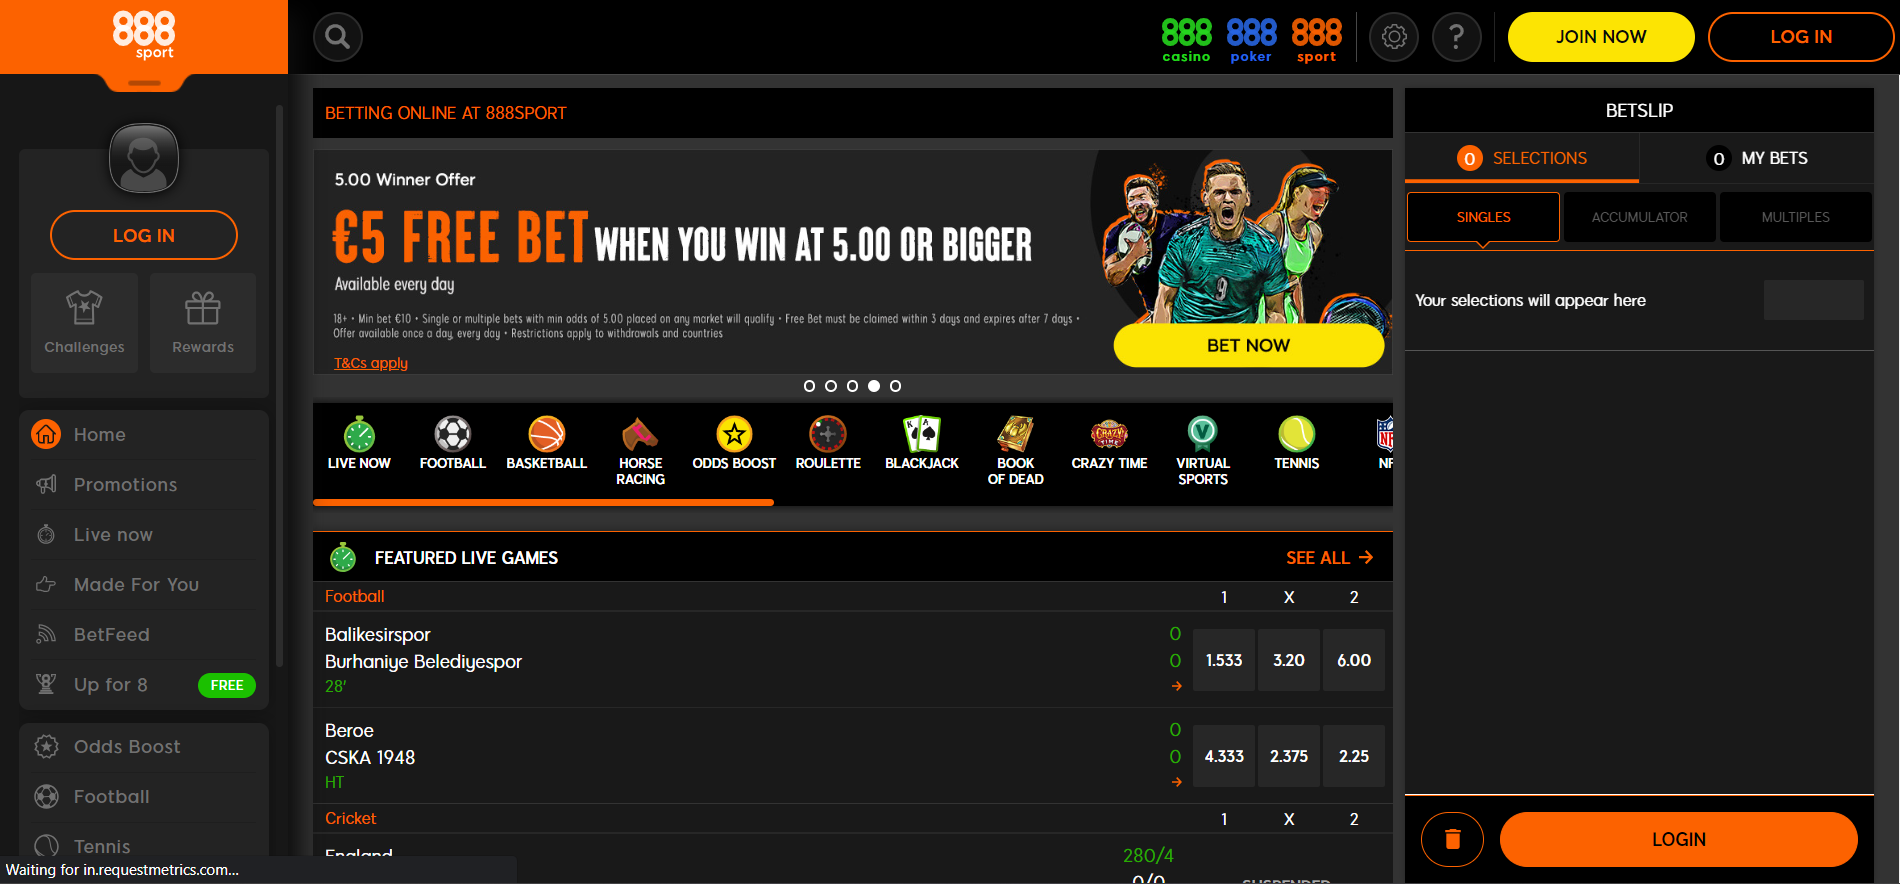 Image for 888Bet homepage